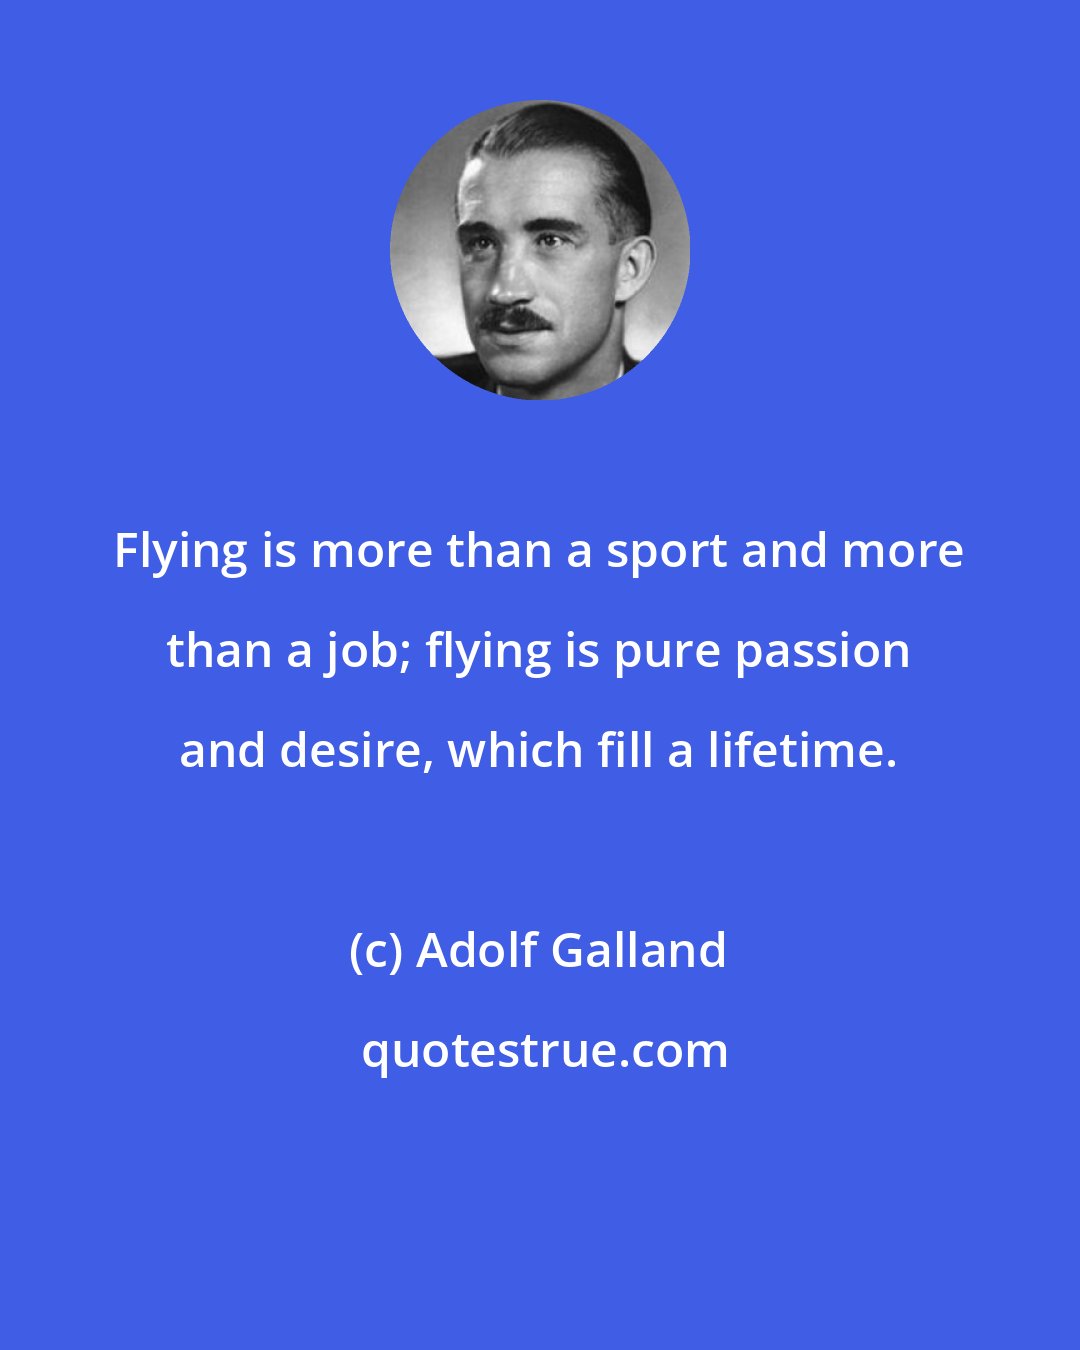 Adolf Galland: Flying is more than a sport and more than a job; flying is pure passion and desire, which fill a lifetime.